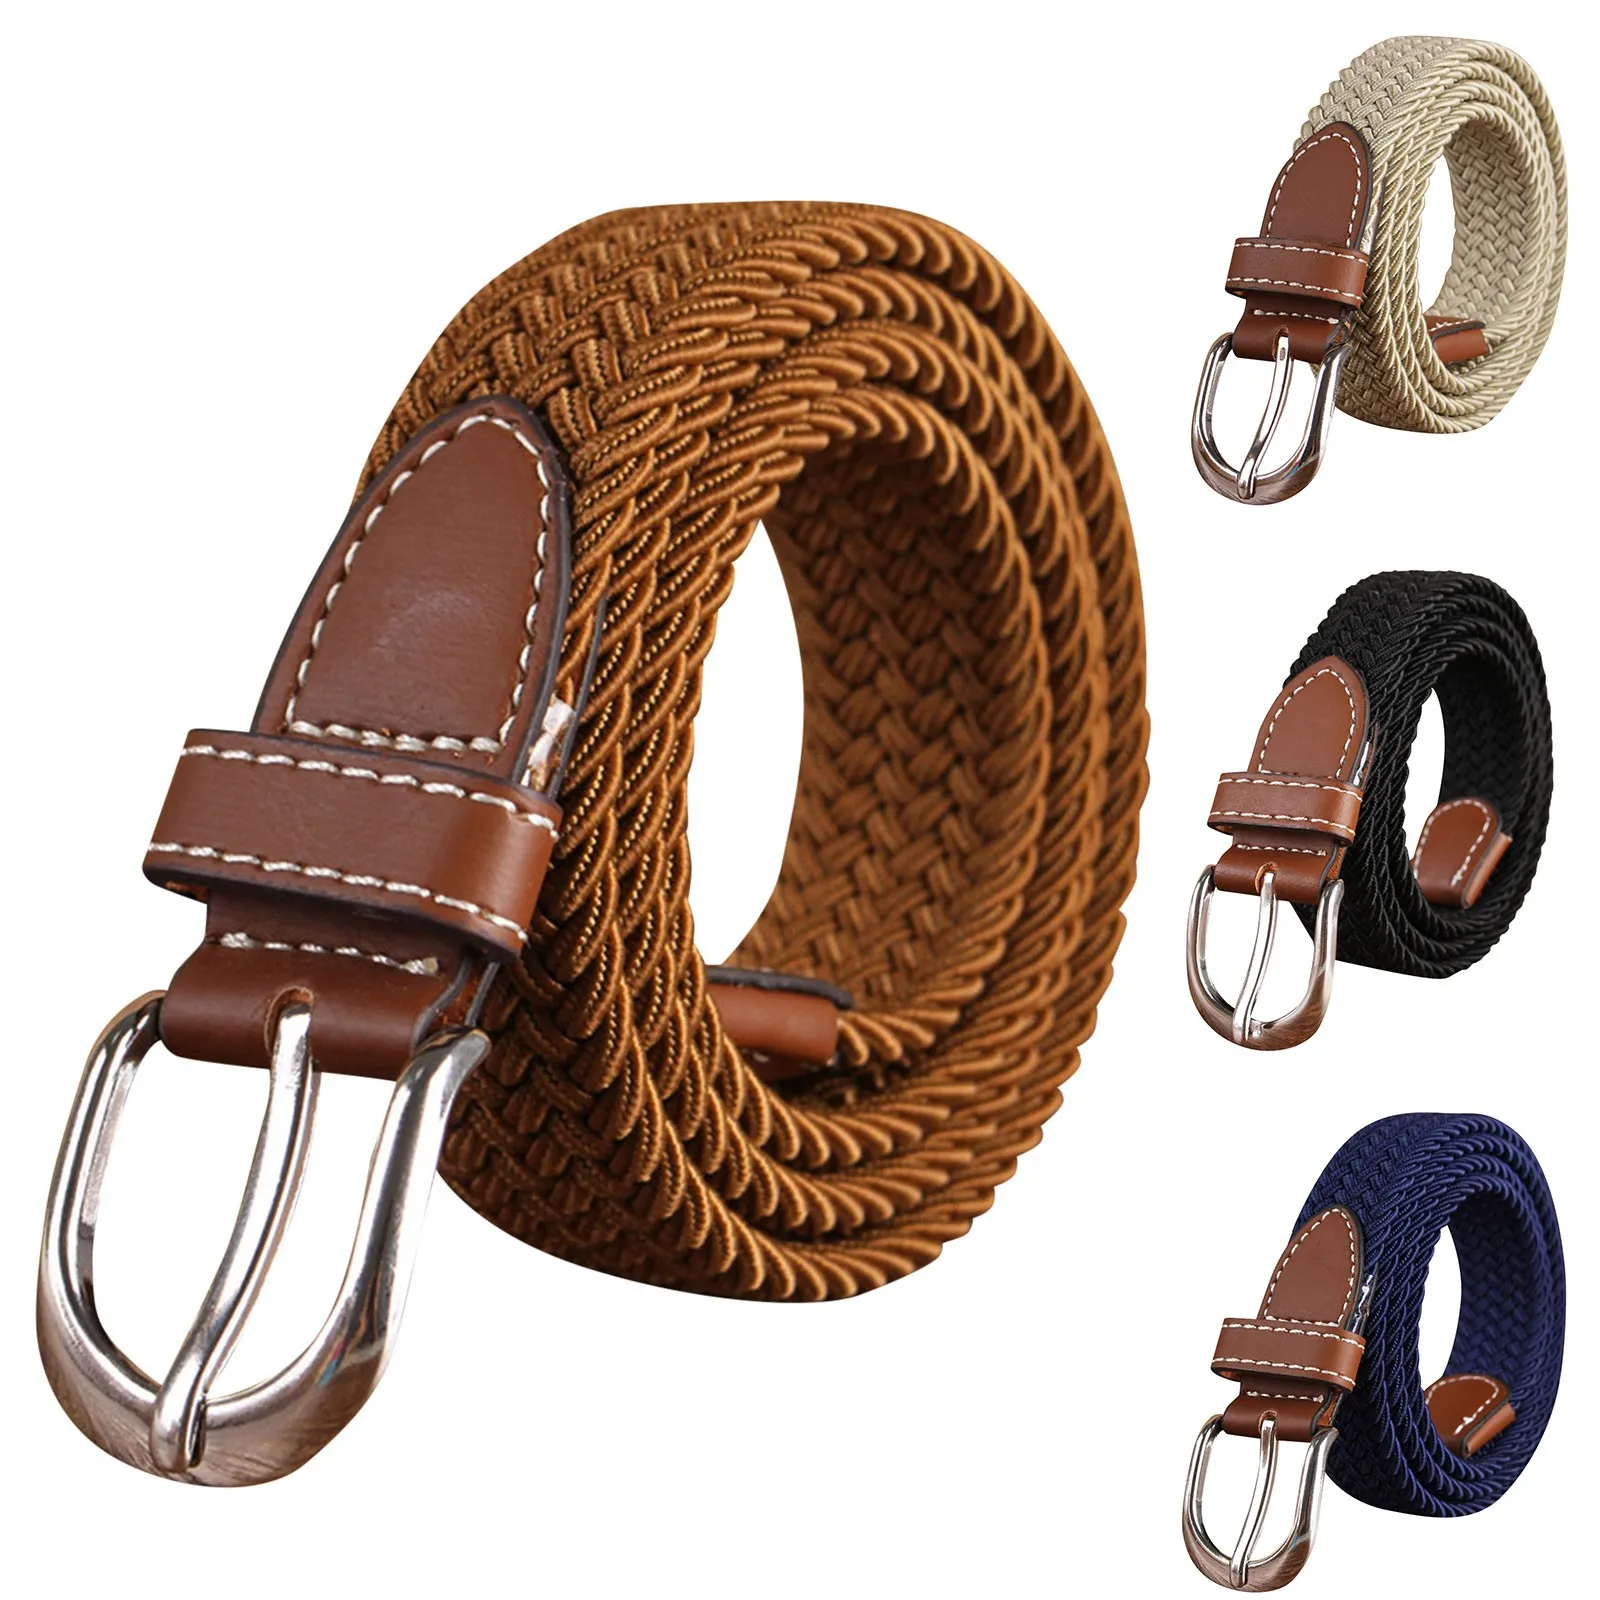 Stretch Canvas Leather Belts For Men Women Casual Knitted Woven Military Tactical Strap Elastic Belt For Pants Jeans 95x2.5 cm